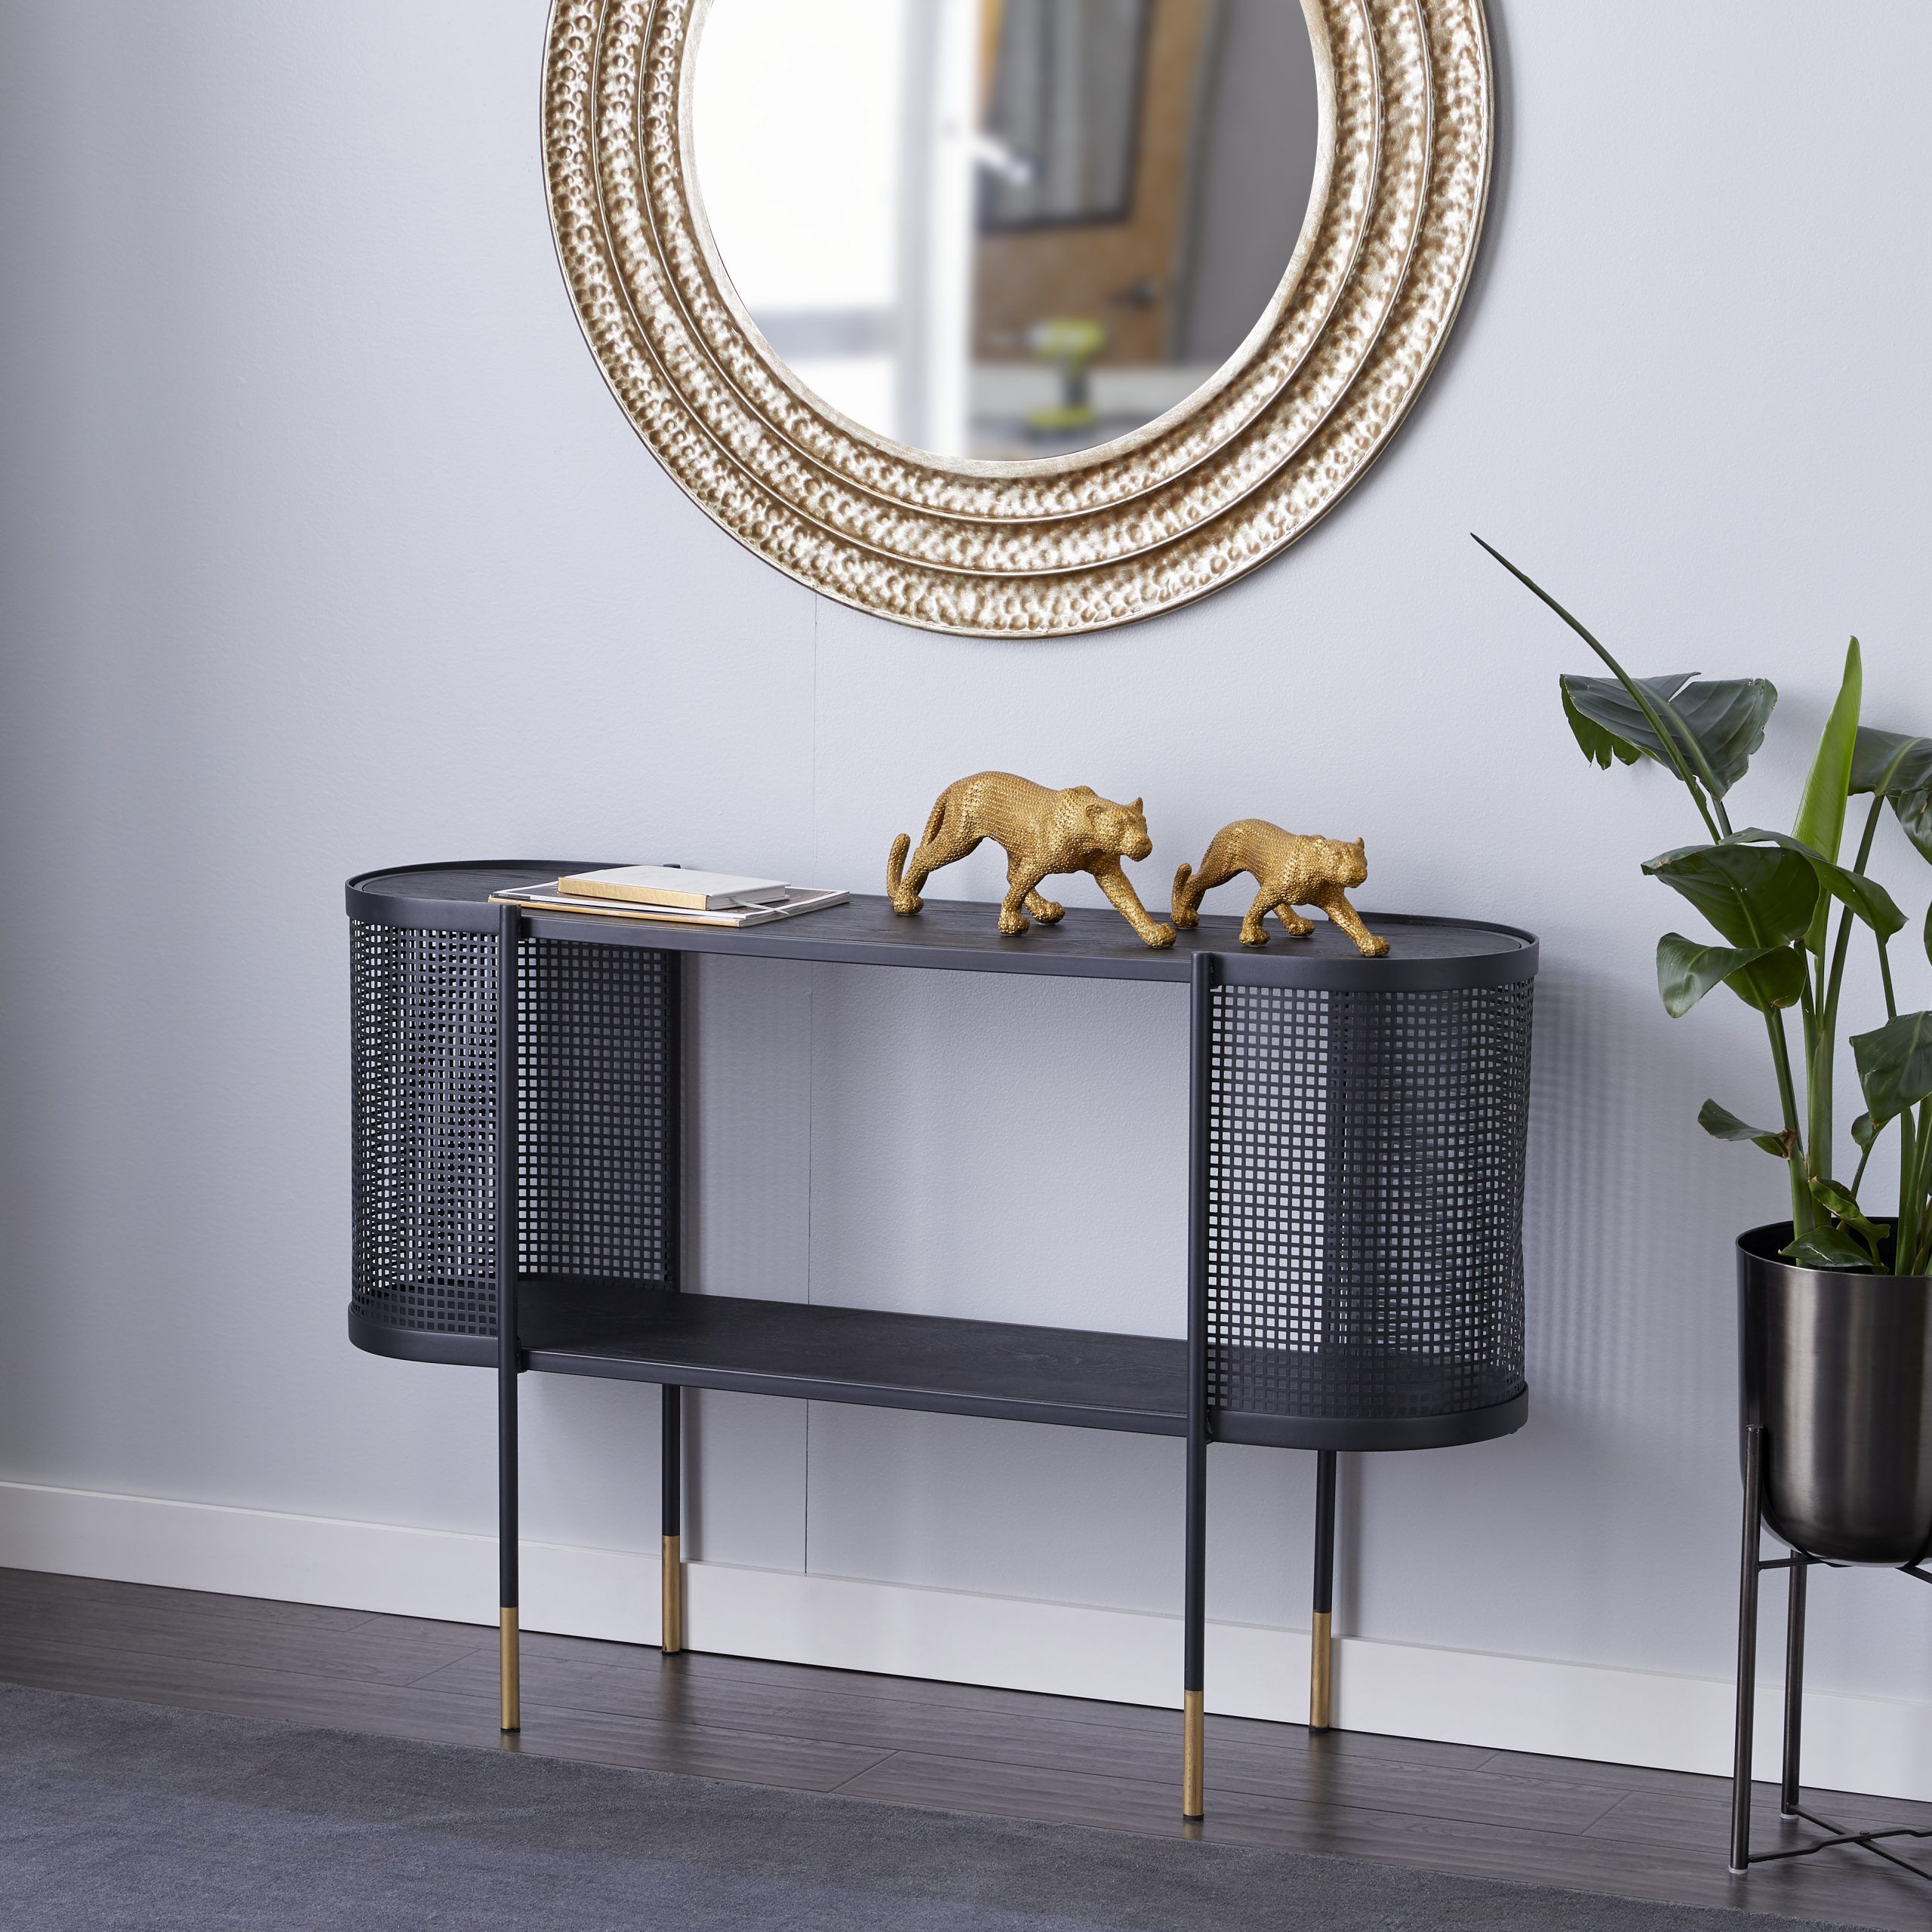 Decmode Oval Black Metal Wrapped Console Table With Open Inside 1 Shelf Square Console Tables (View 2 of 20)